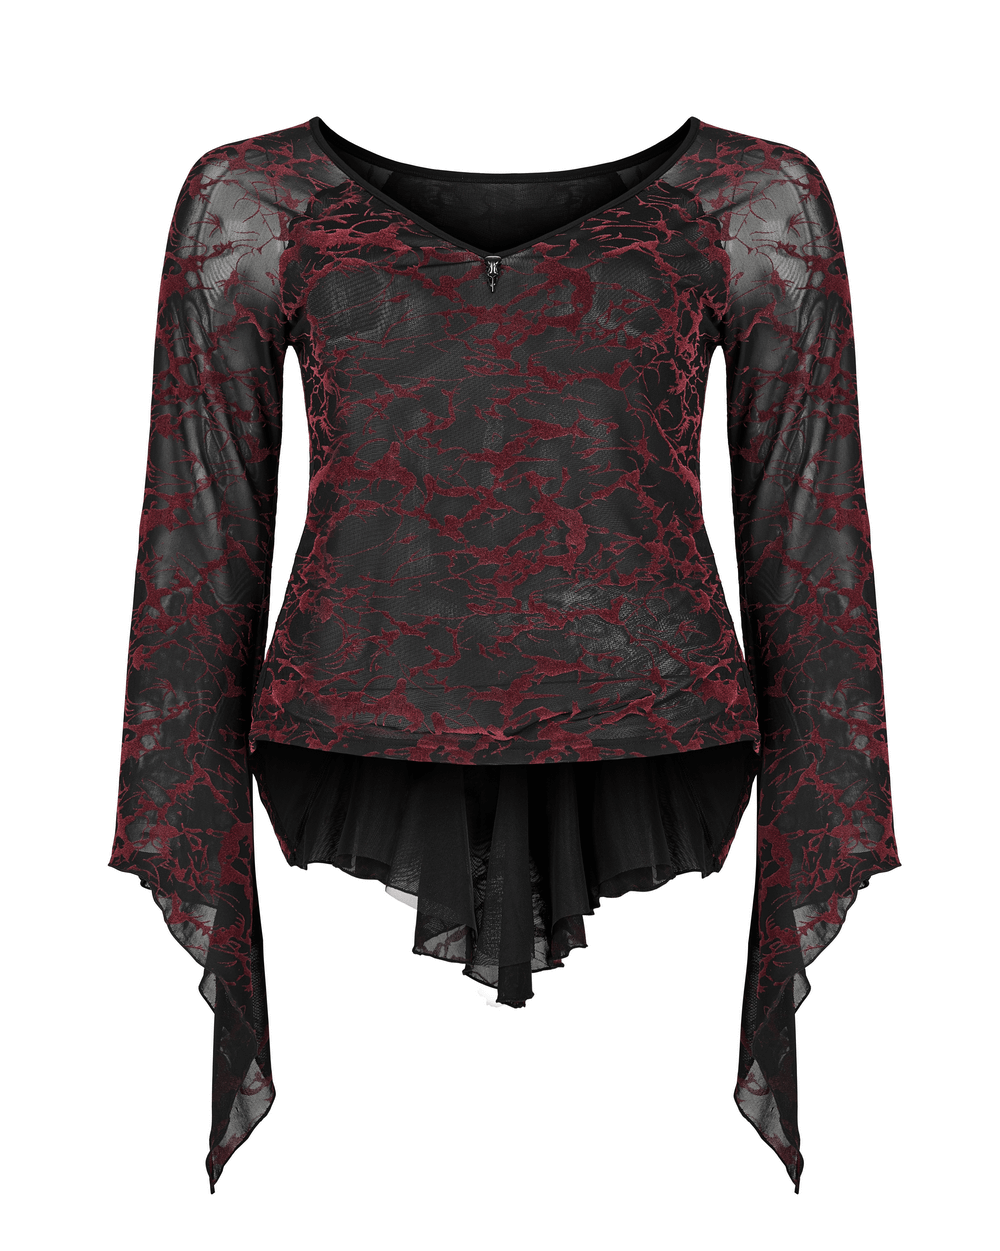 Scarlet Abstract V-Neck Mesh Goth Top for Women - HARD'N'HEAVY